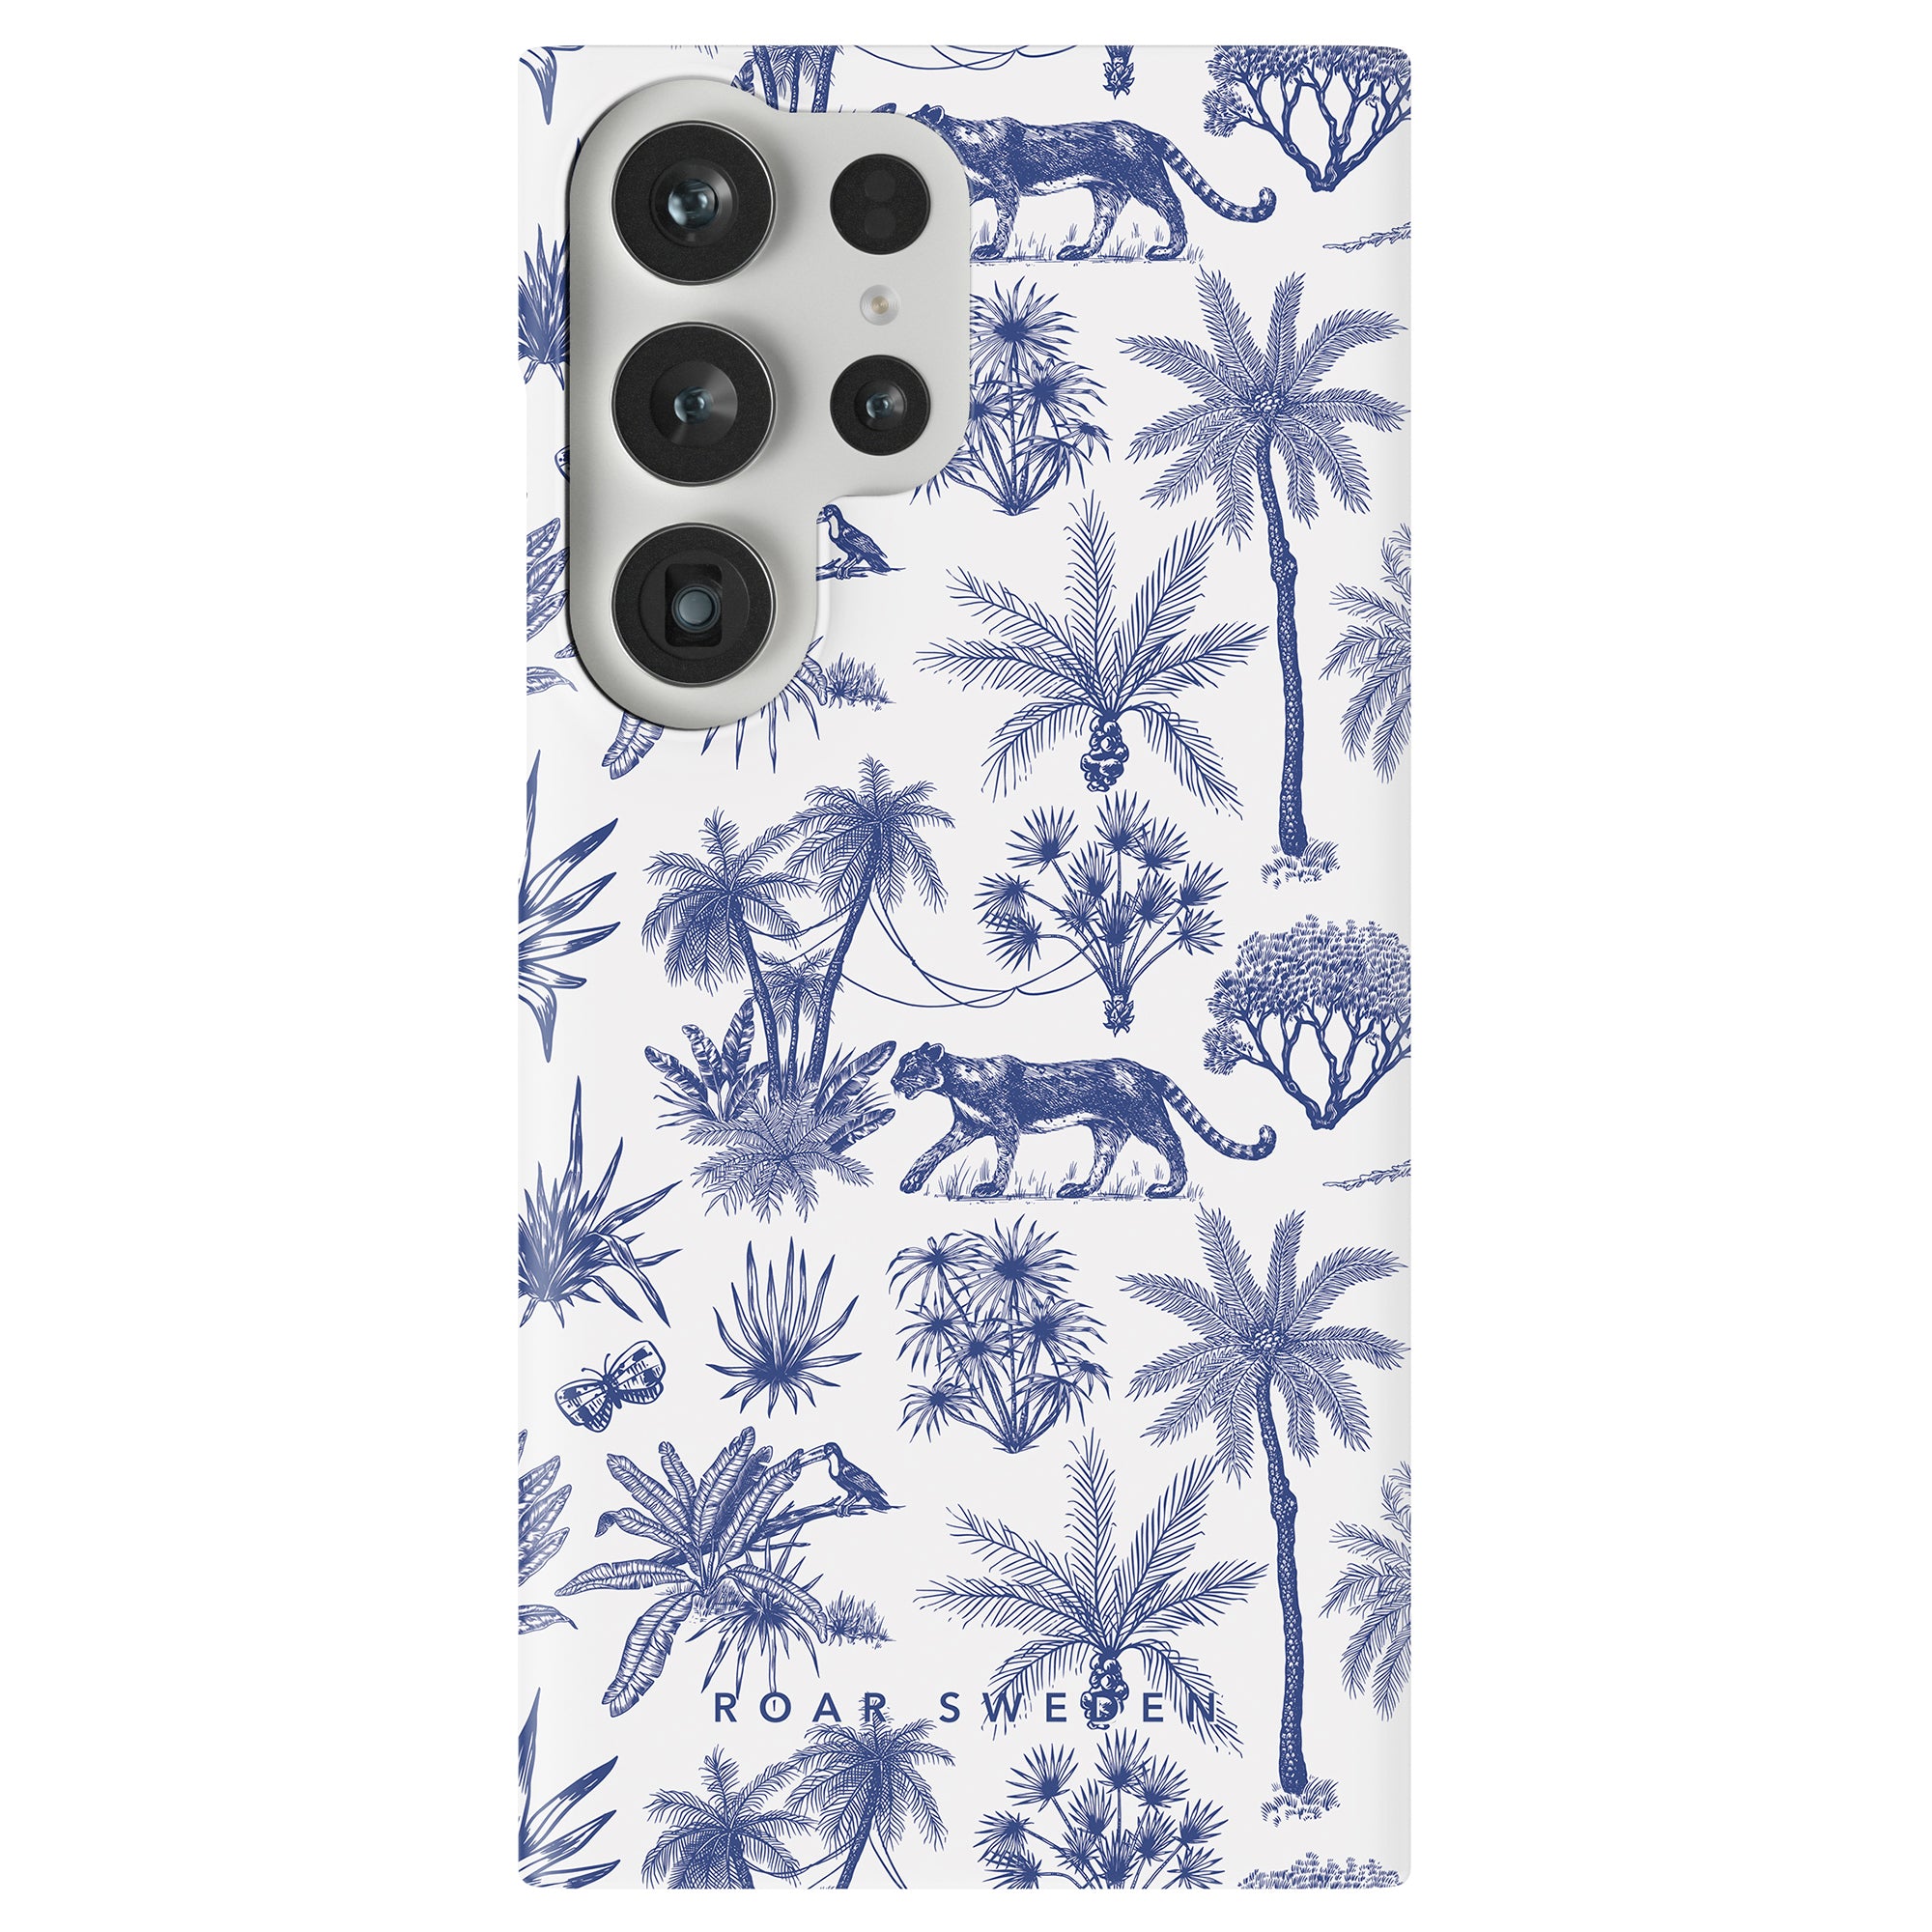 A lightweight smartphone with a Toile De Jouy slim case featuring blue illustrations of tropical trees, animals, and "roar sweet" text, incorporating the camera lenses into the artwork.